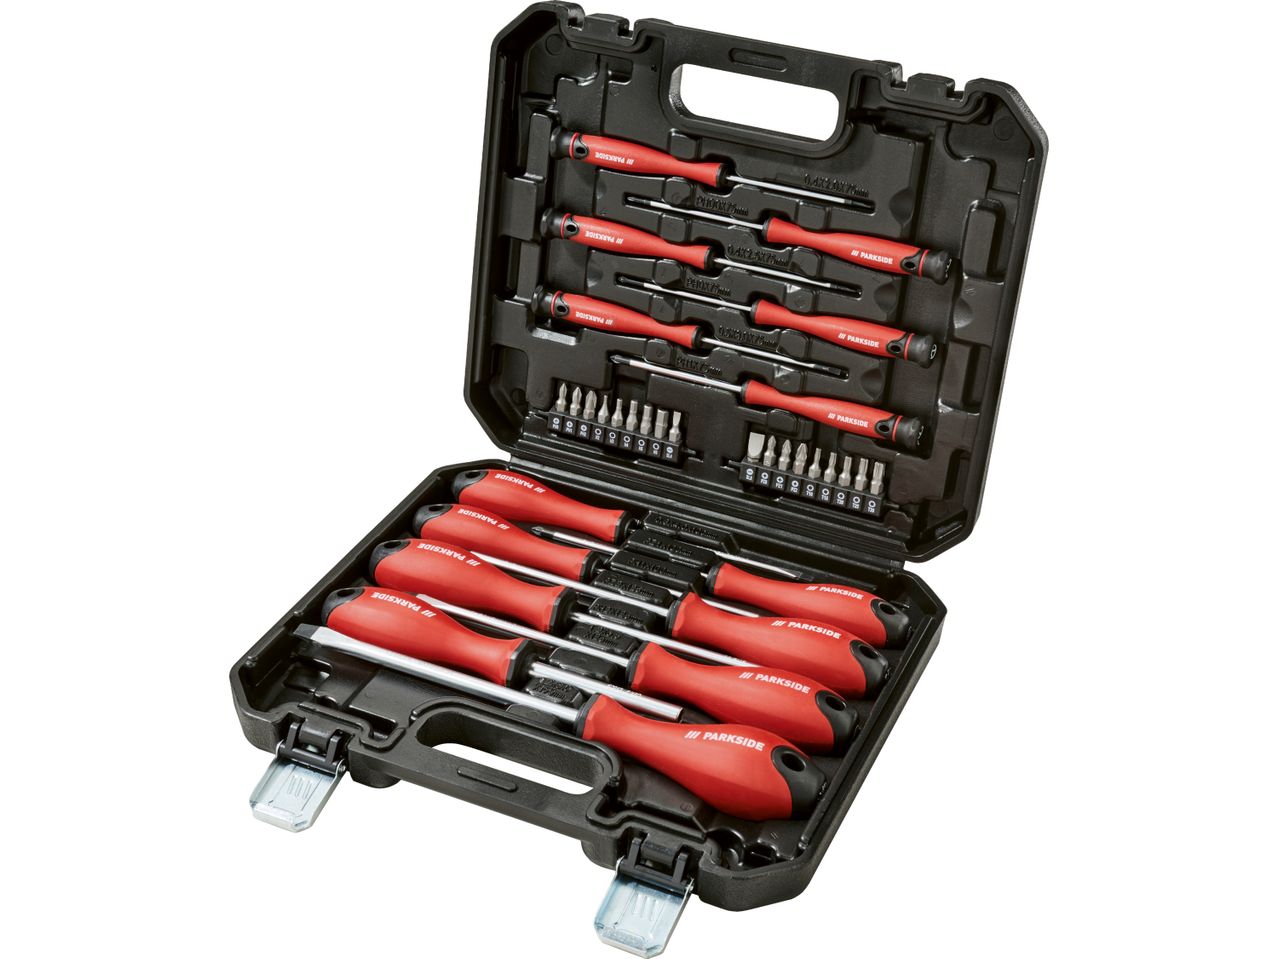 Go to full screen view: Parkside Screwdriver Set - 32 Piece Set - Image 2